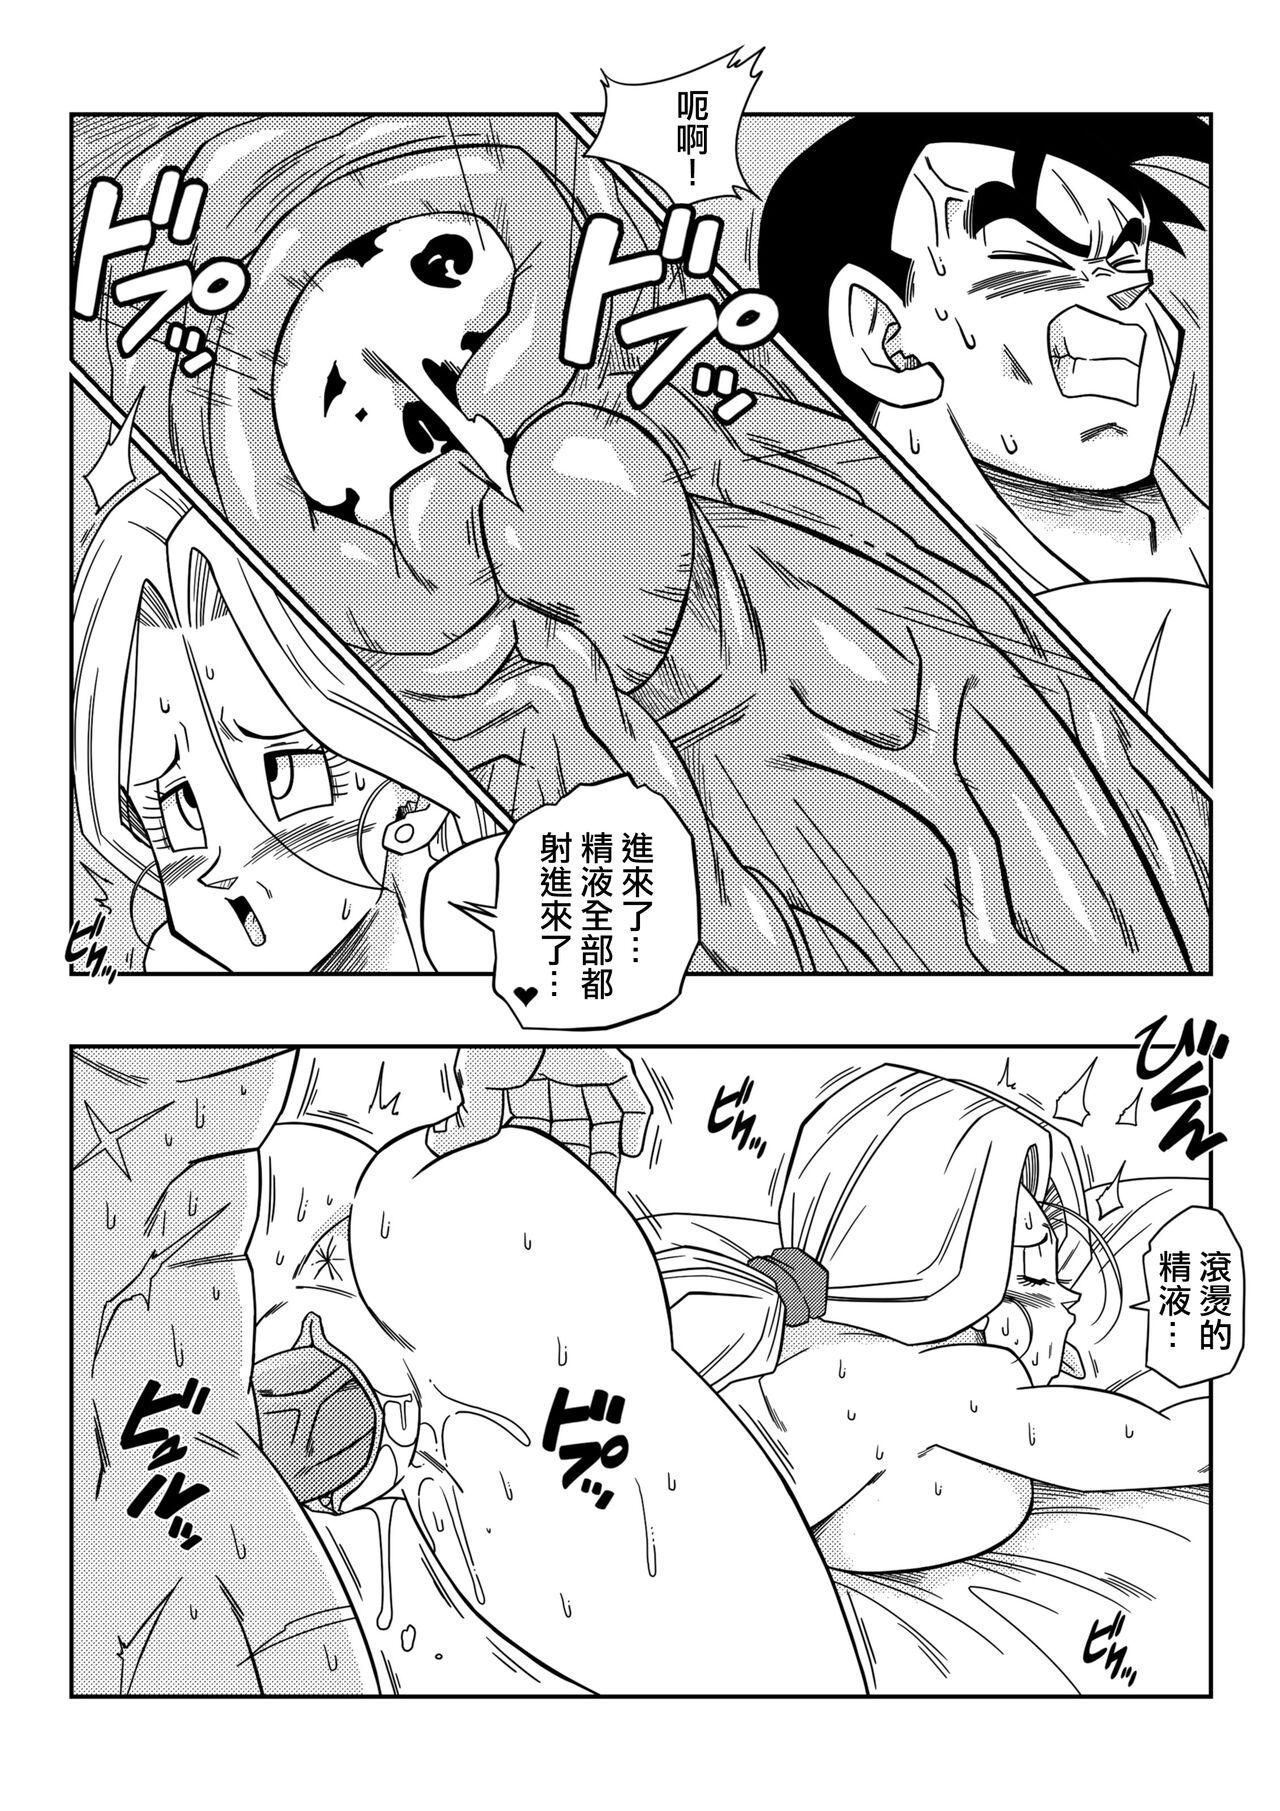 Amateur Cum Lost of sex in this Future! - BULMA and GOHAN - Dragon ball z Cornudo - Page 9